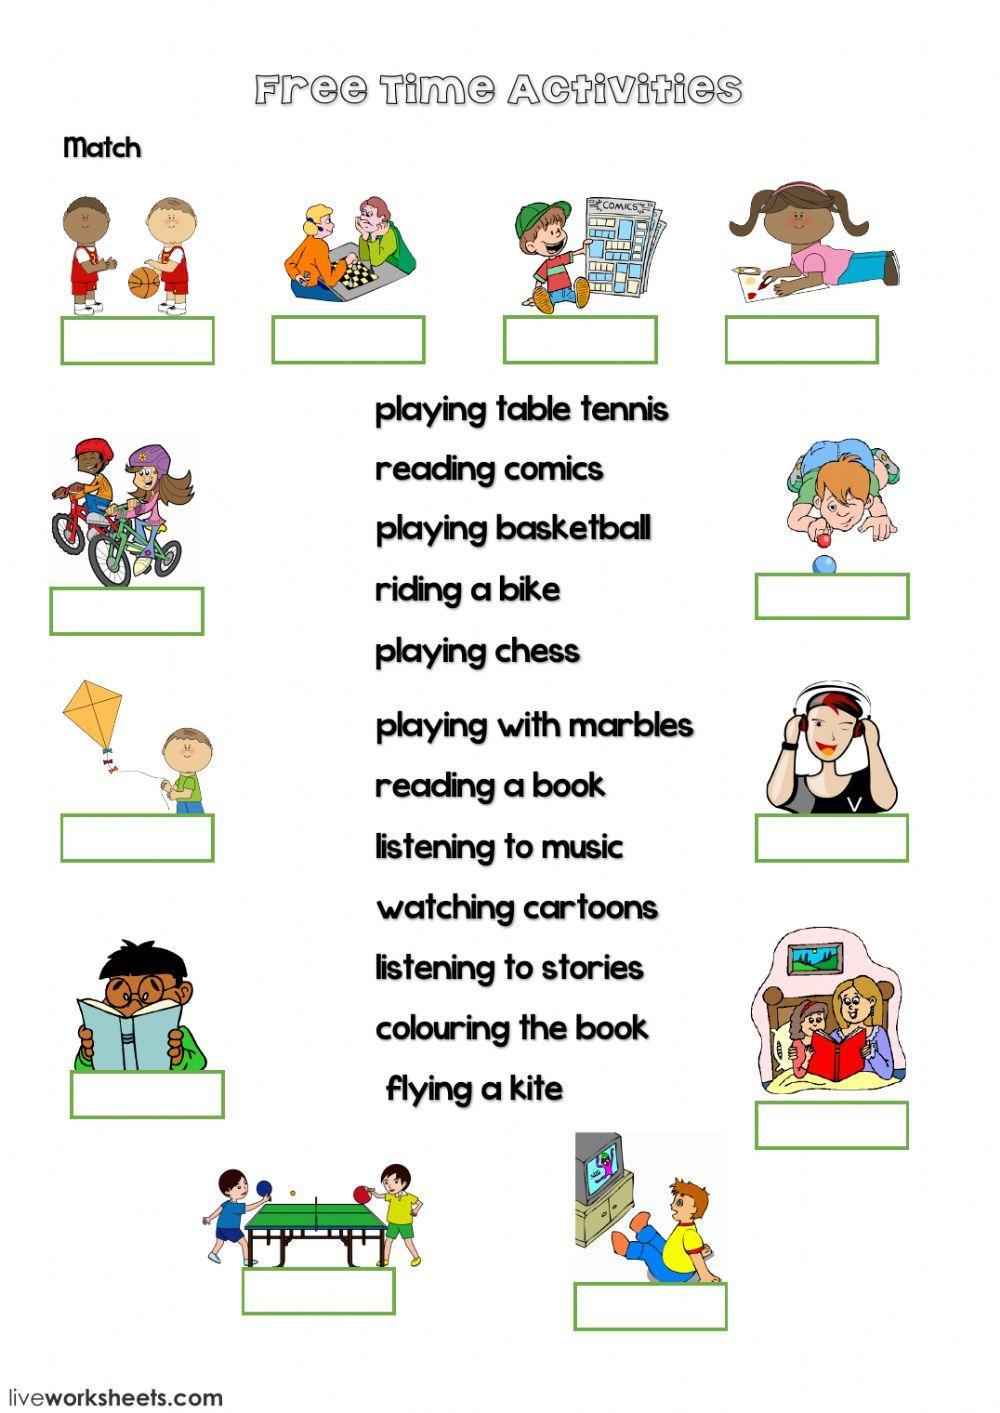 Free Time Activities (with video) worksheet